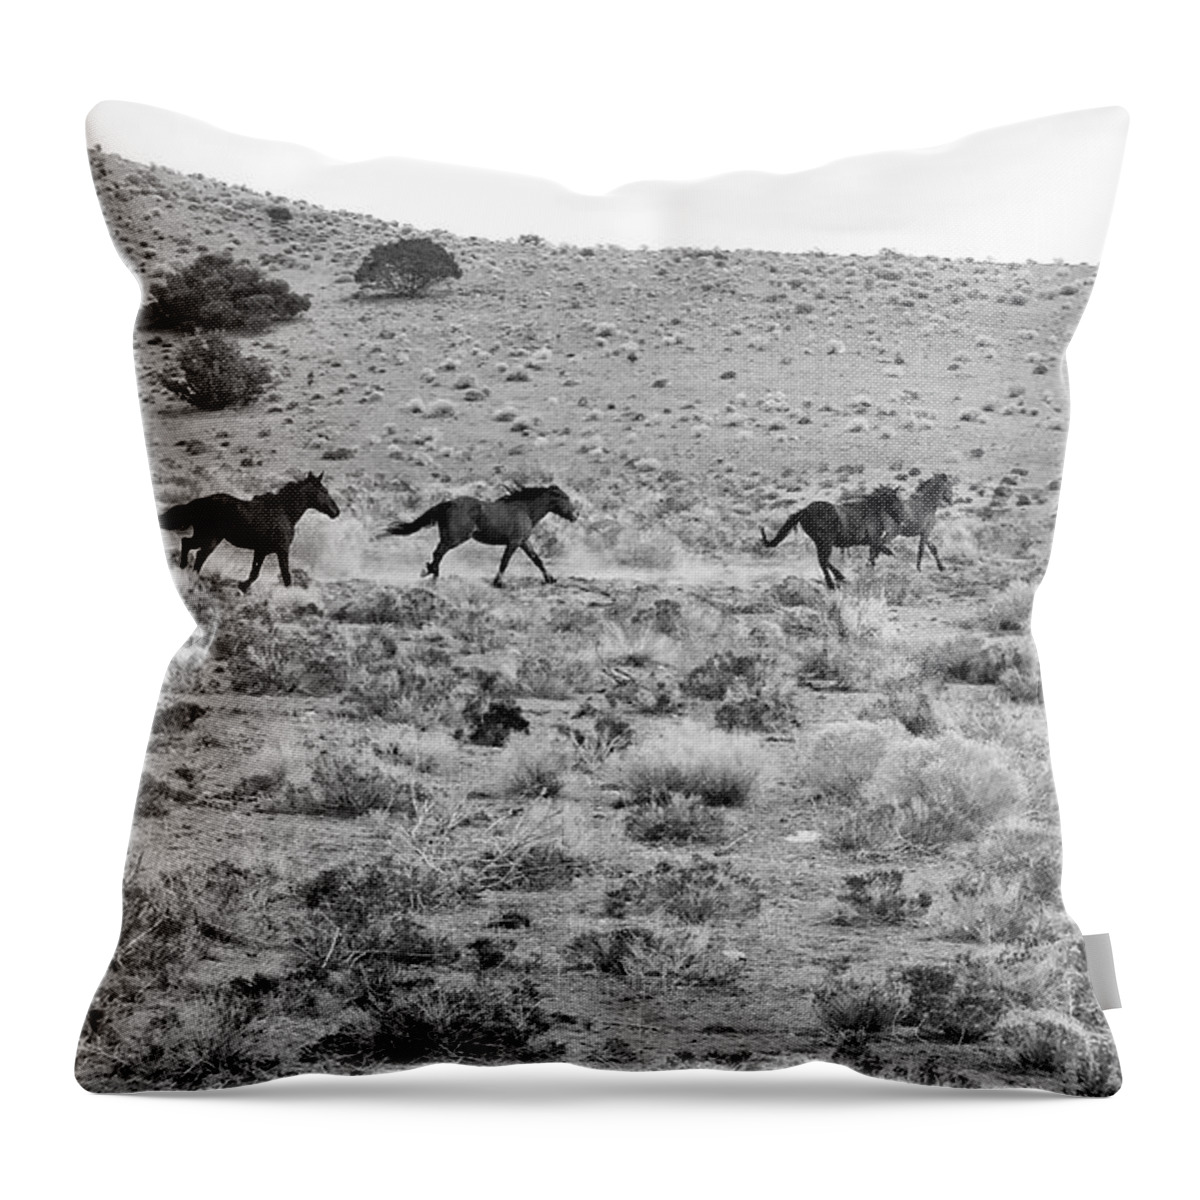 Horses Throw Pillow featuring the photograph Wild Mustang Stallions Running by Waterdancer 